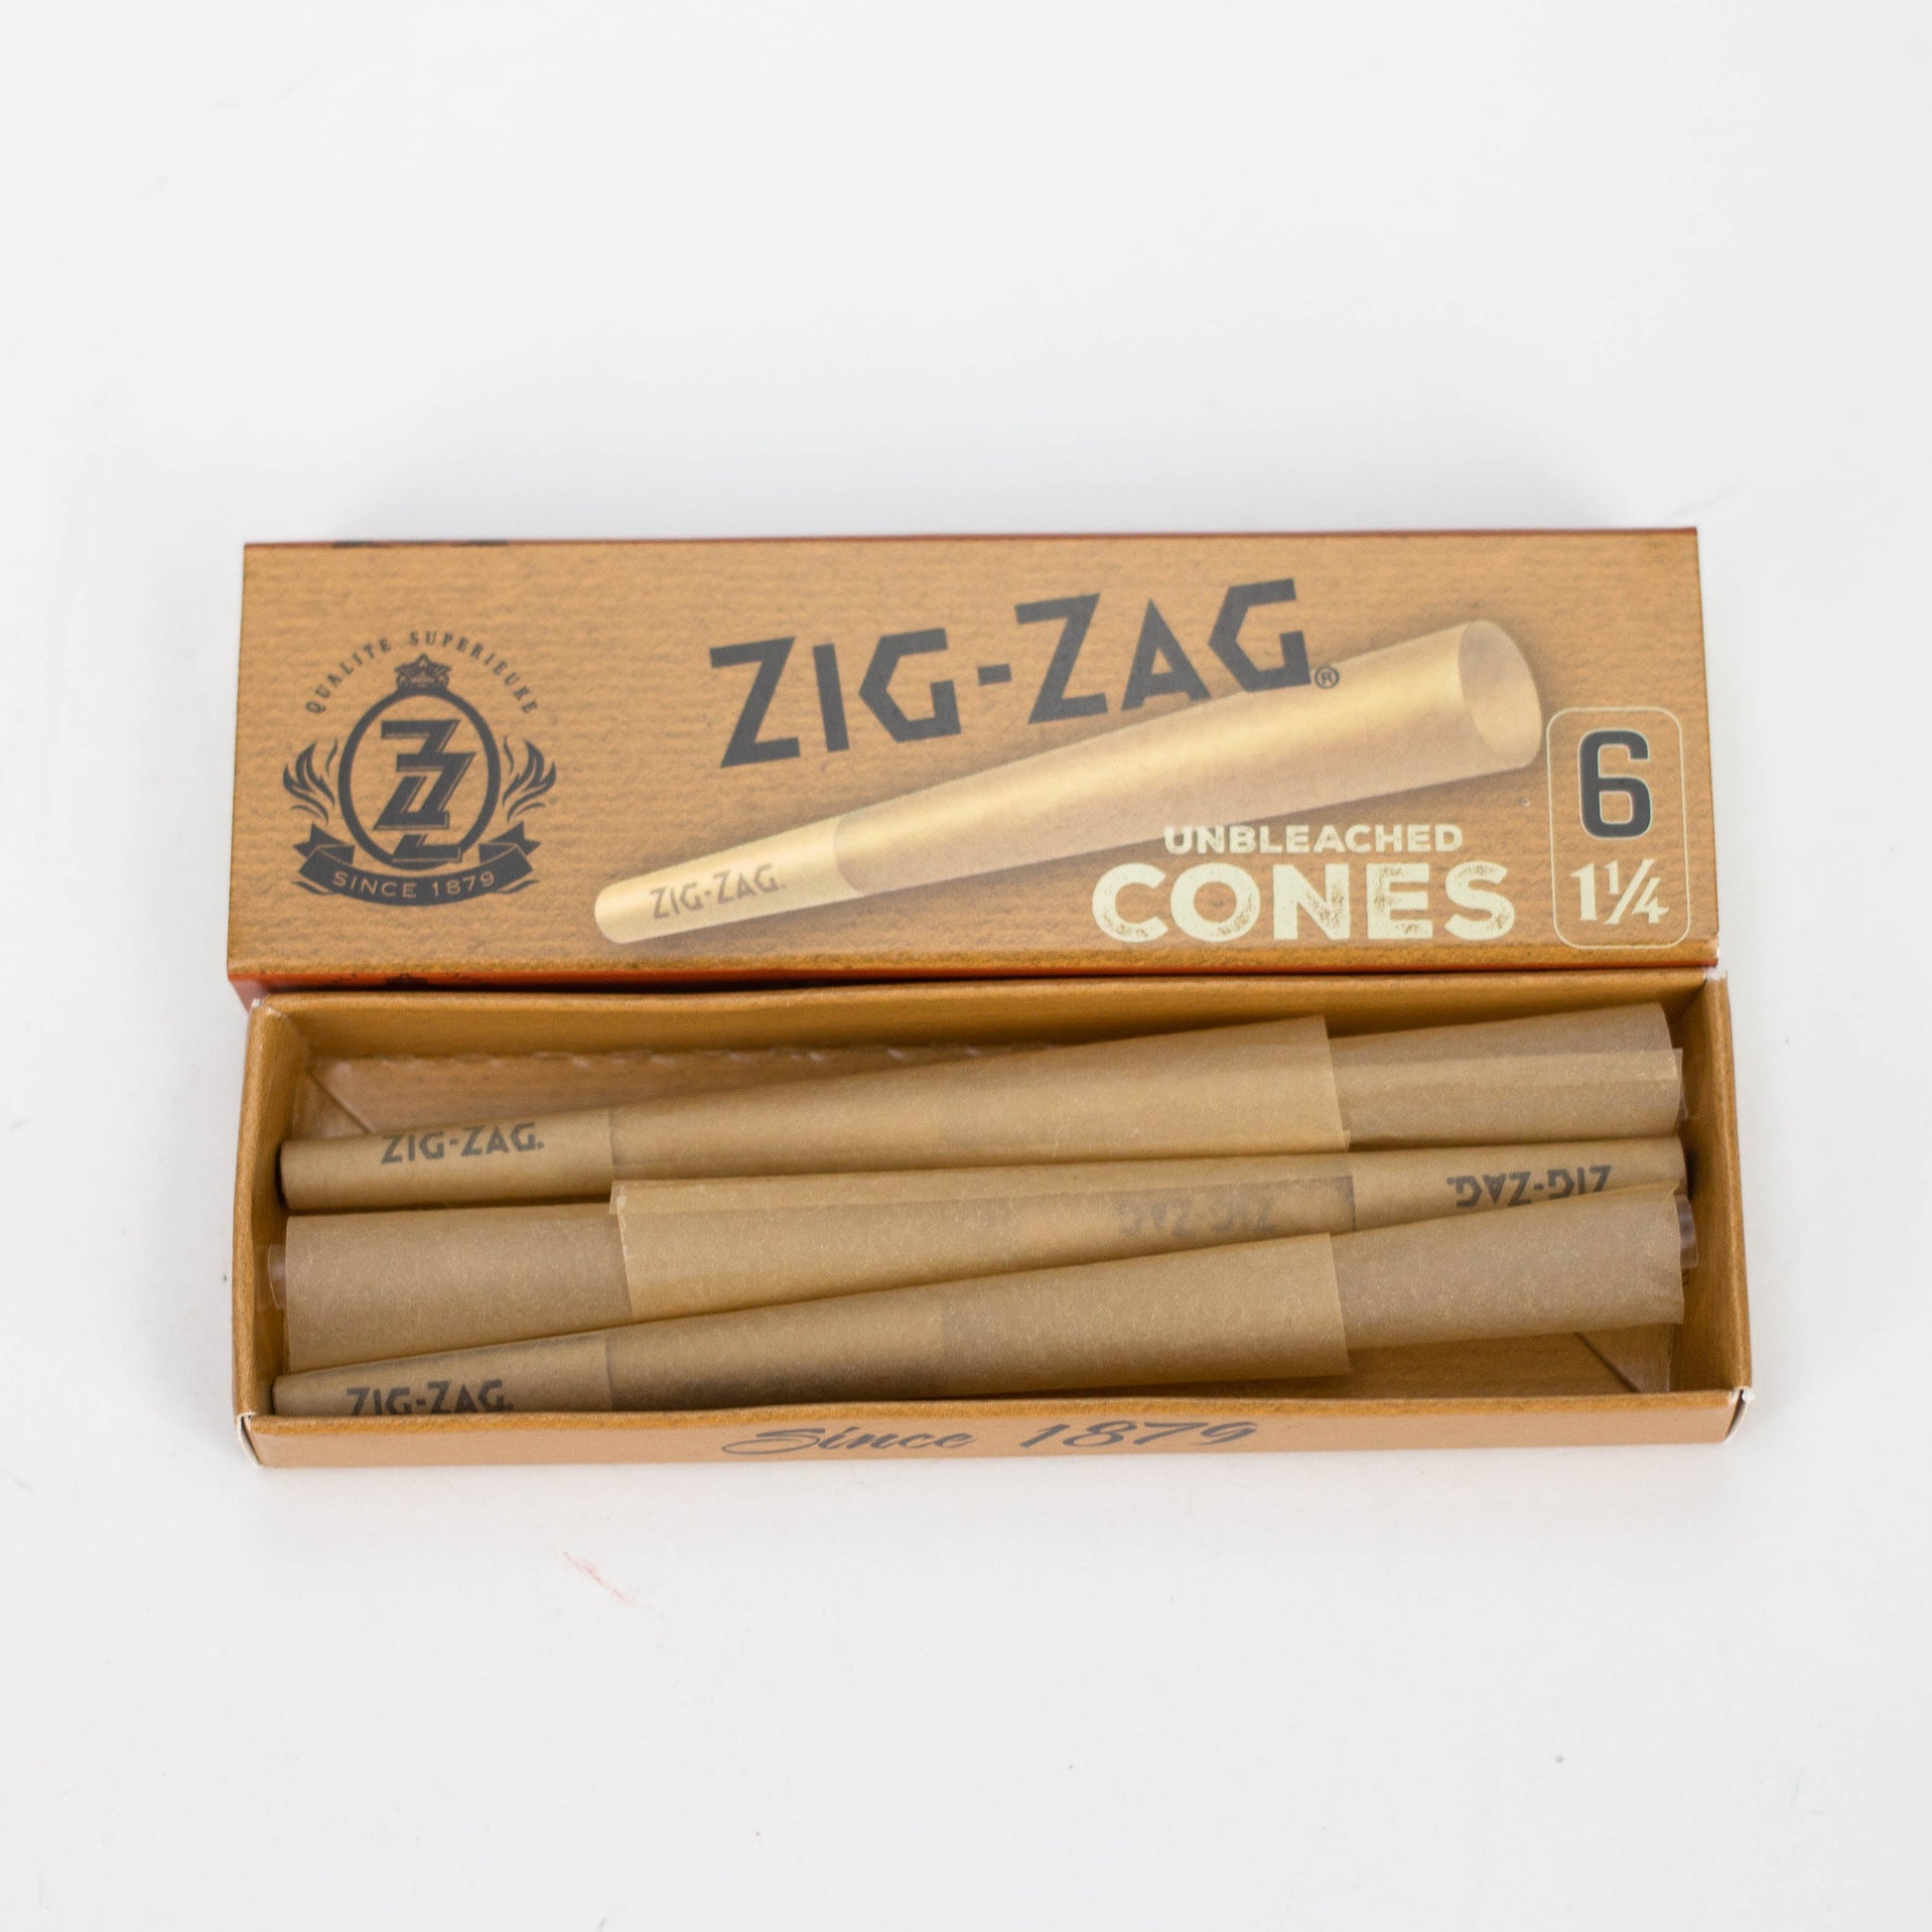 Pre-Rolled Cones - Zig-Zag Brown 1 1/4 Papers Box of 24_2